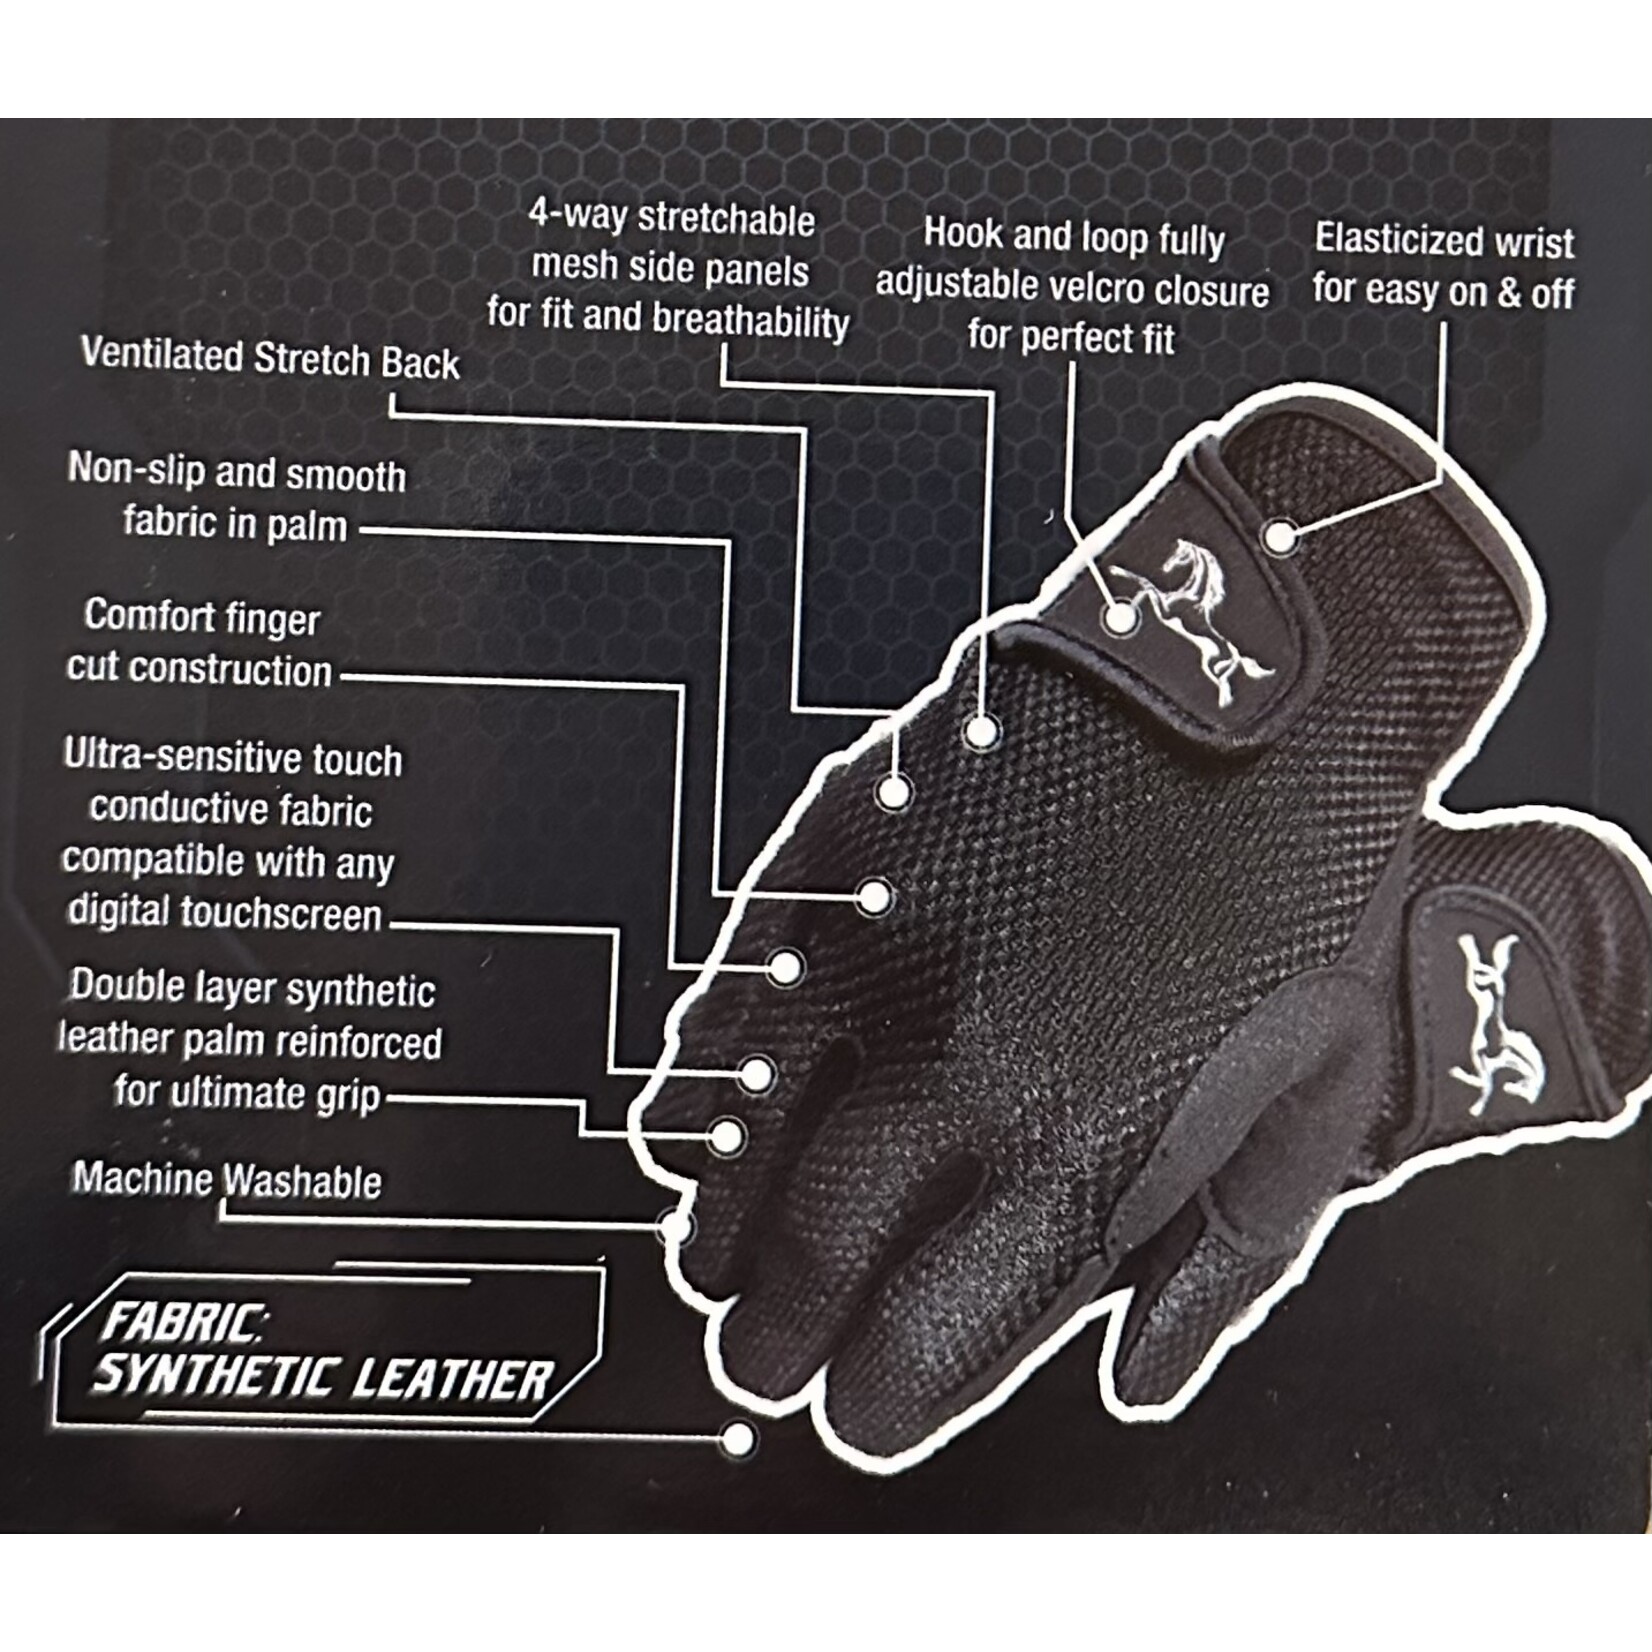 Timeless Essential Riding Gloves Adult